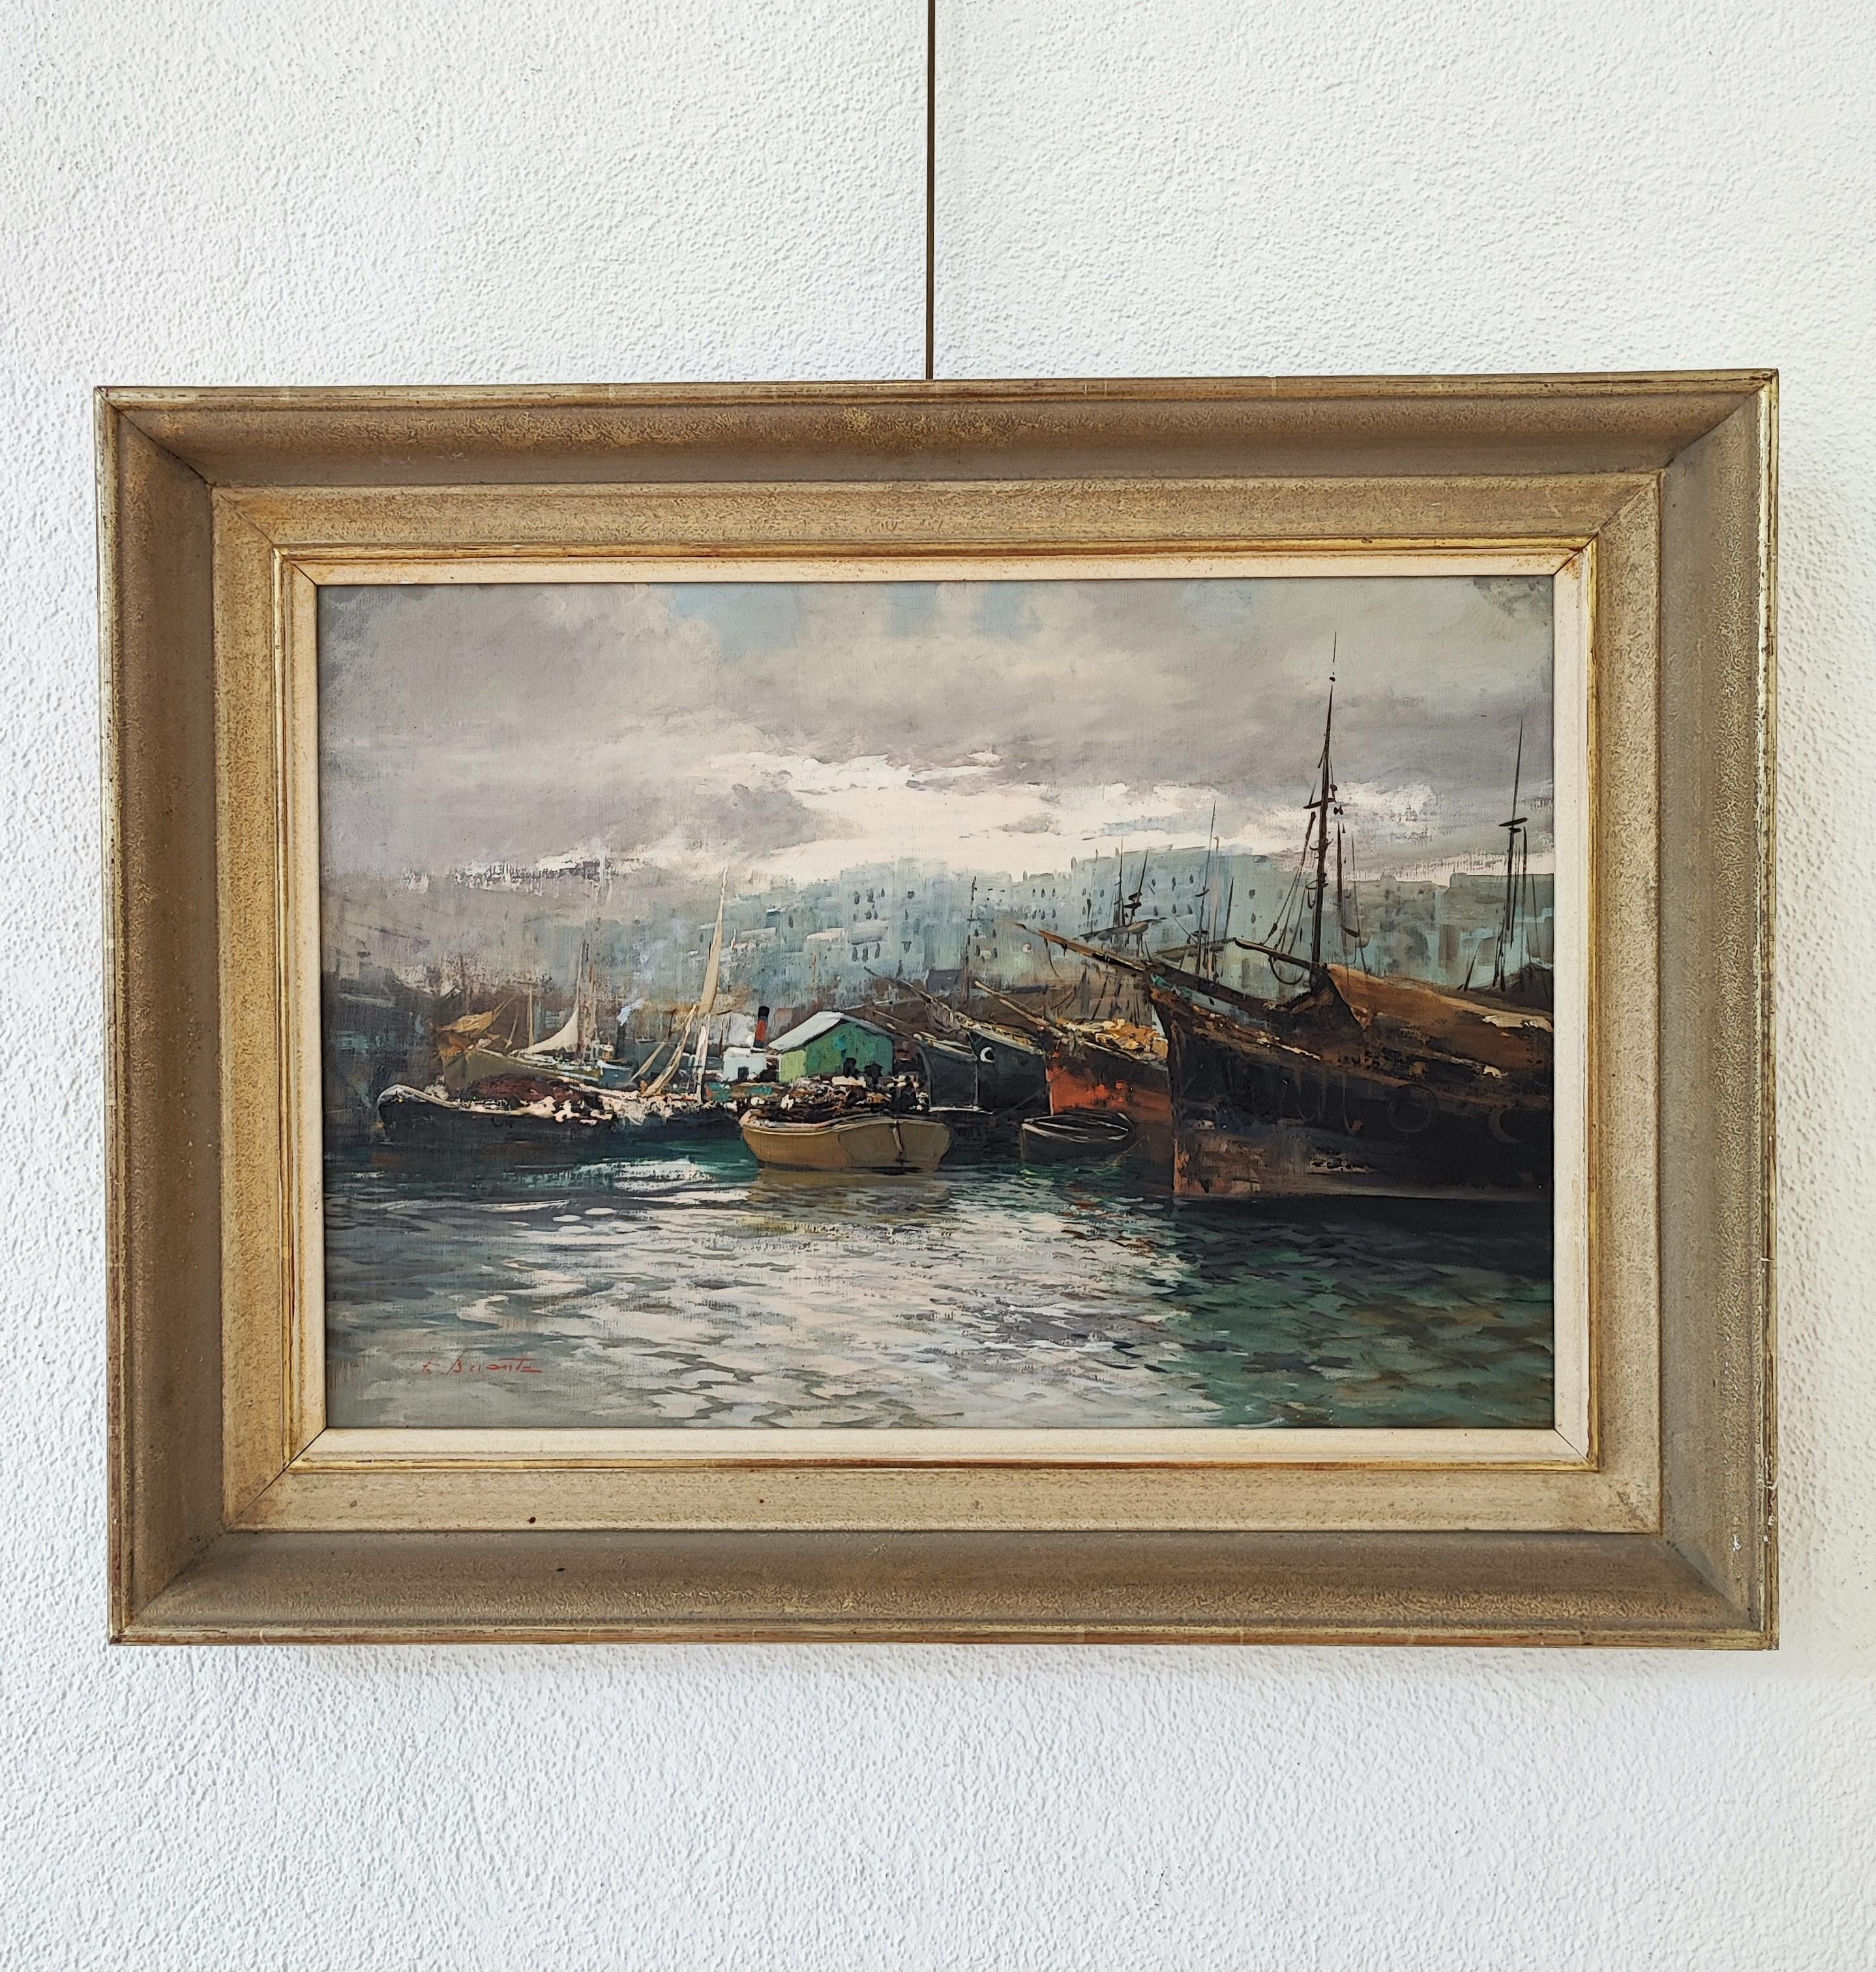 The big port - Painting by Ezelino Briante